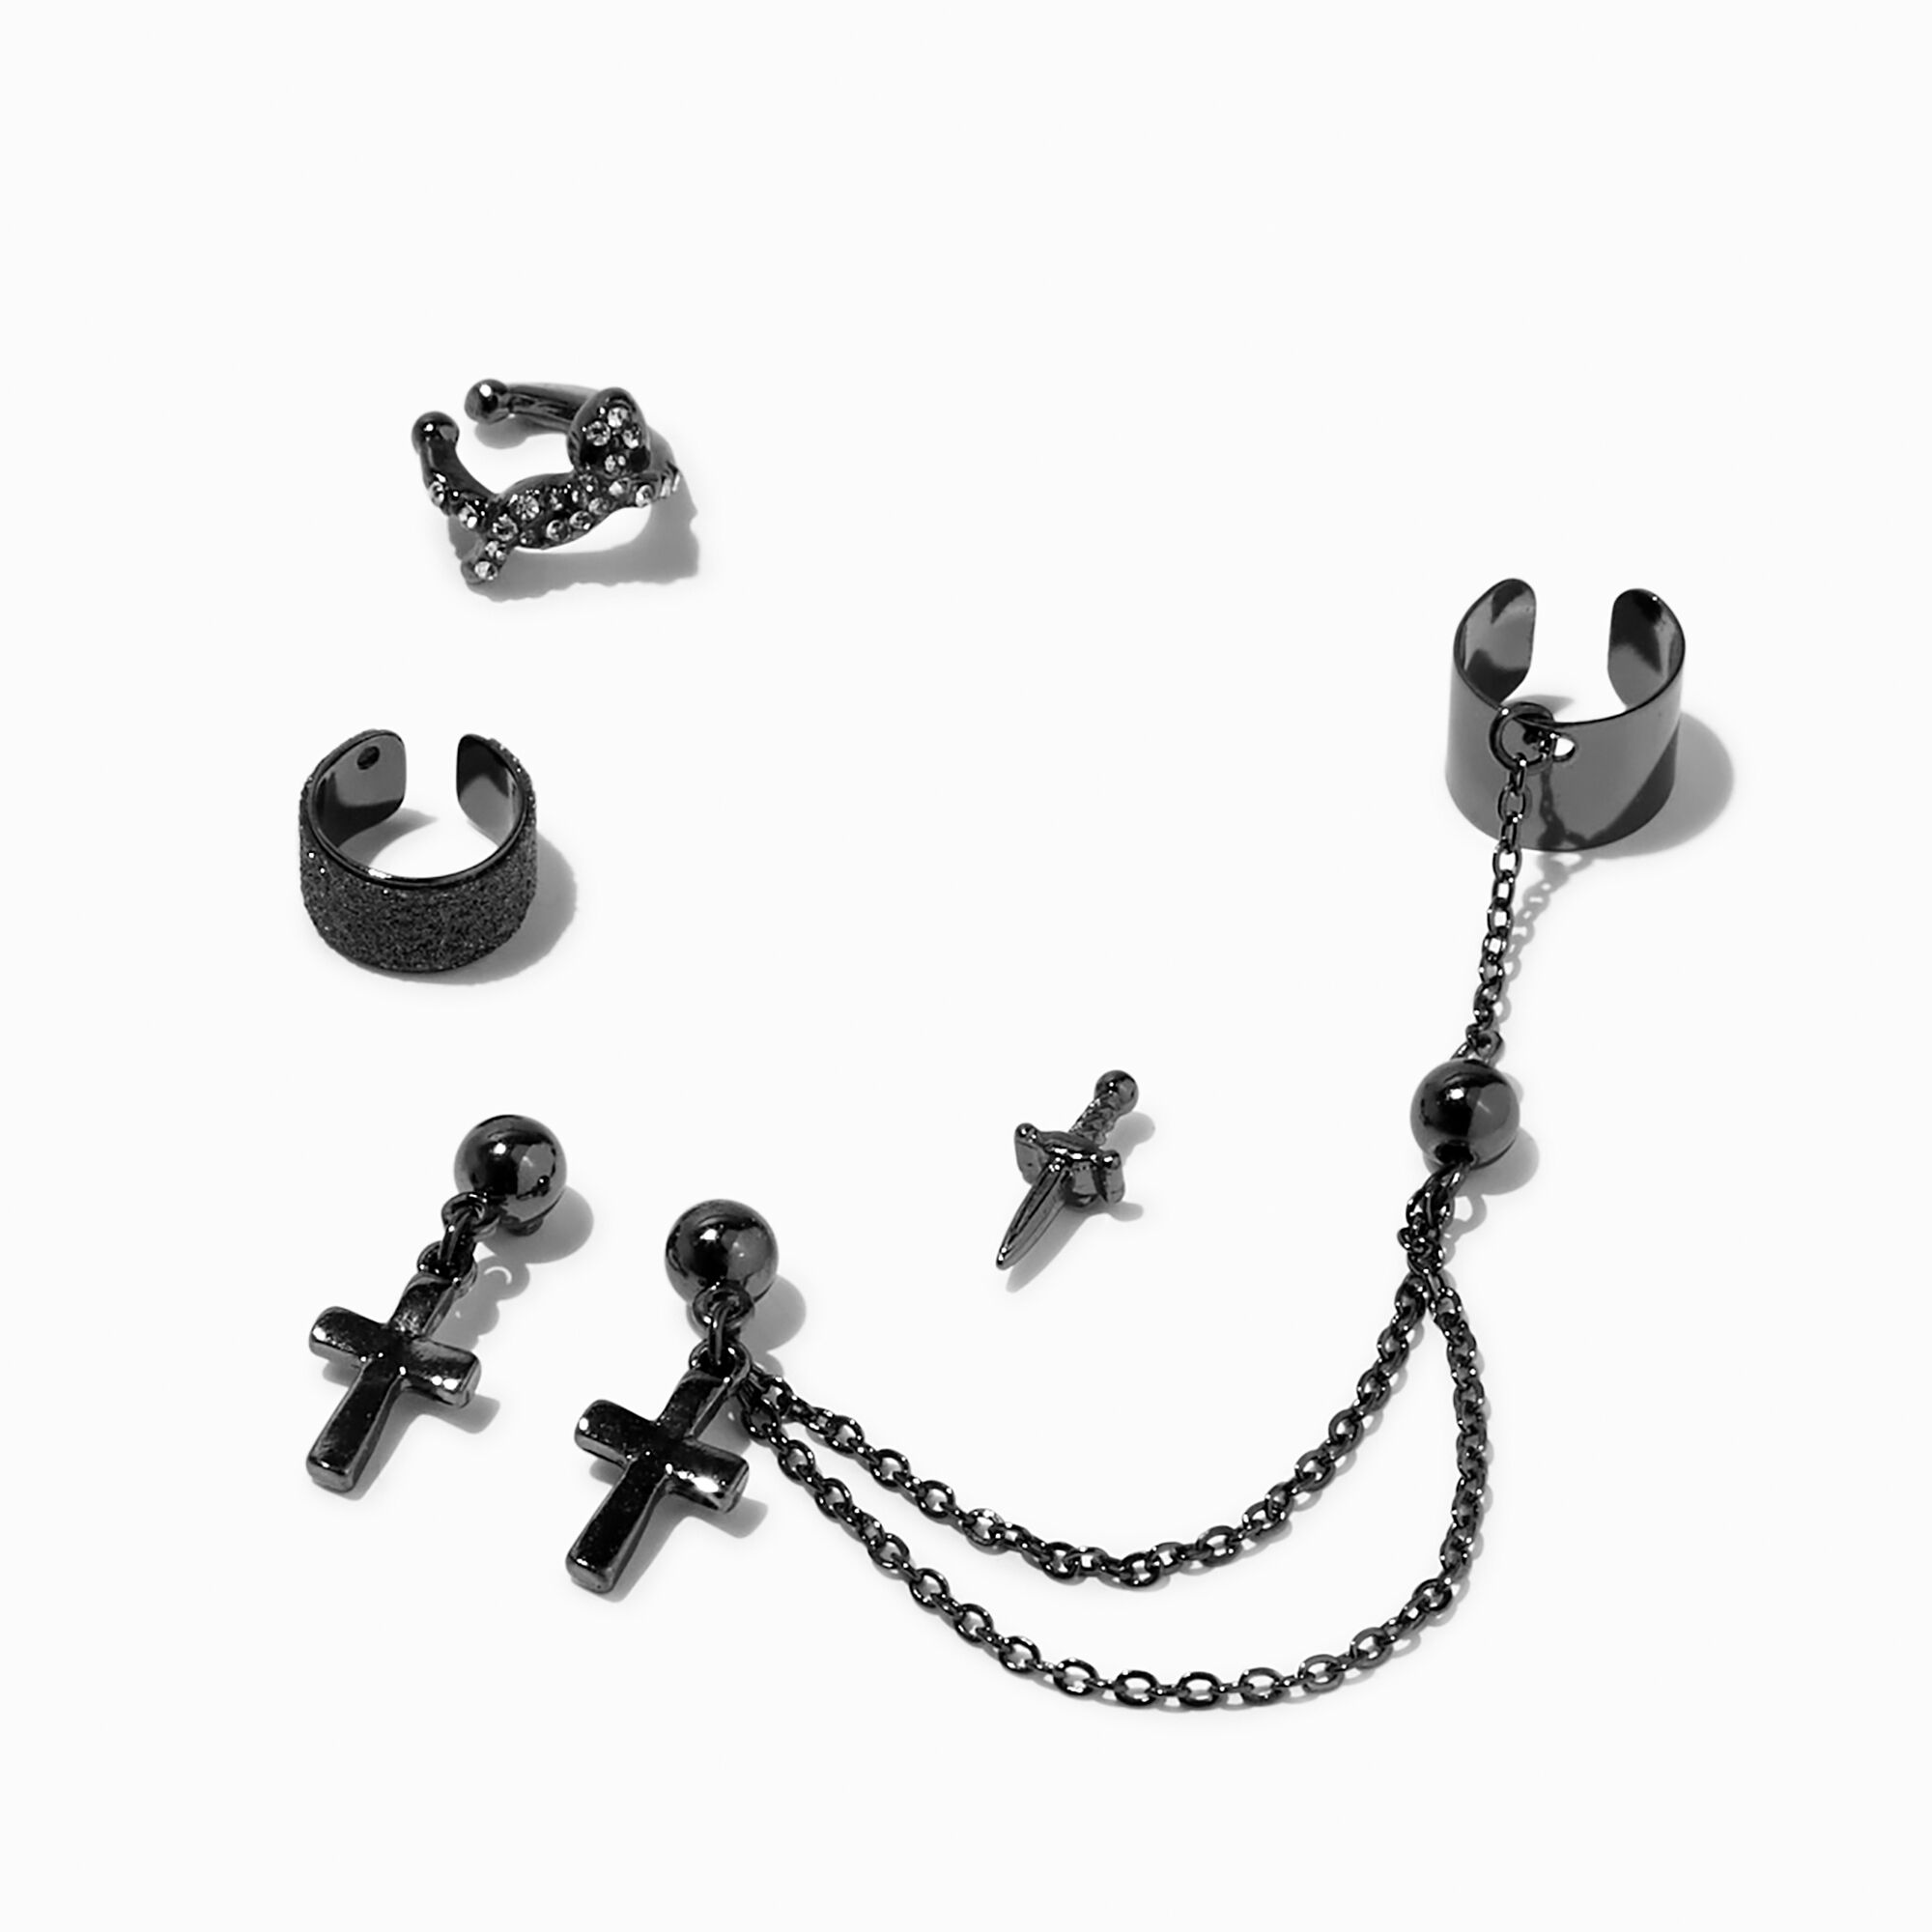 View Claires Sword Cross Cuff Earrings Stackables 5 Pack Black information